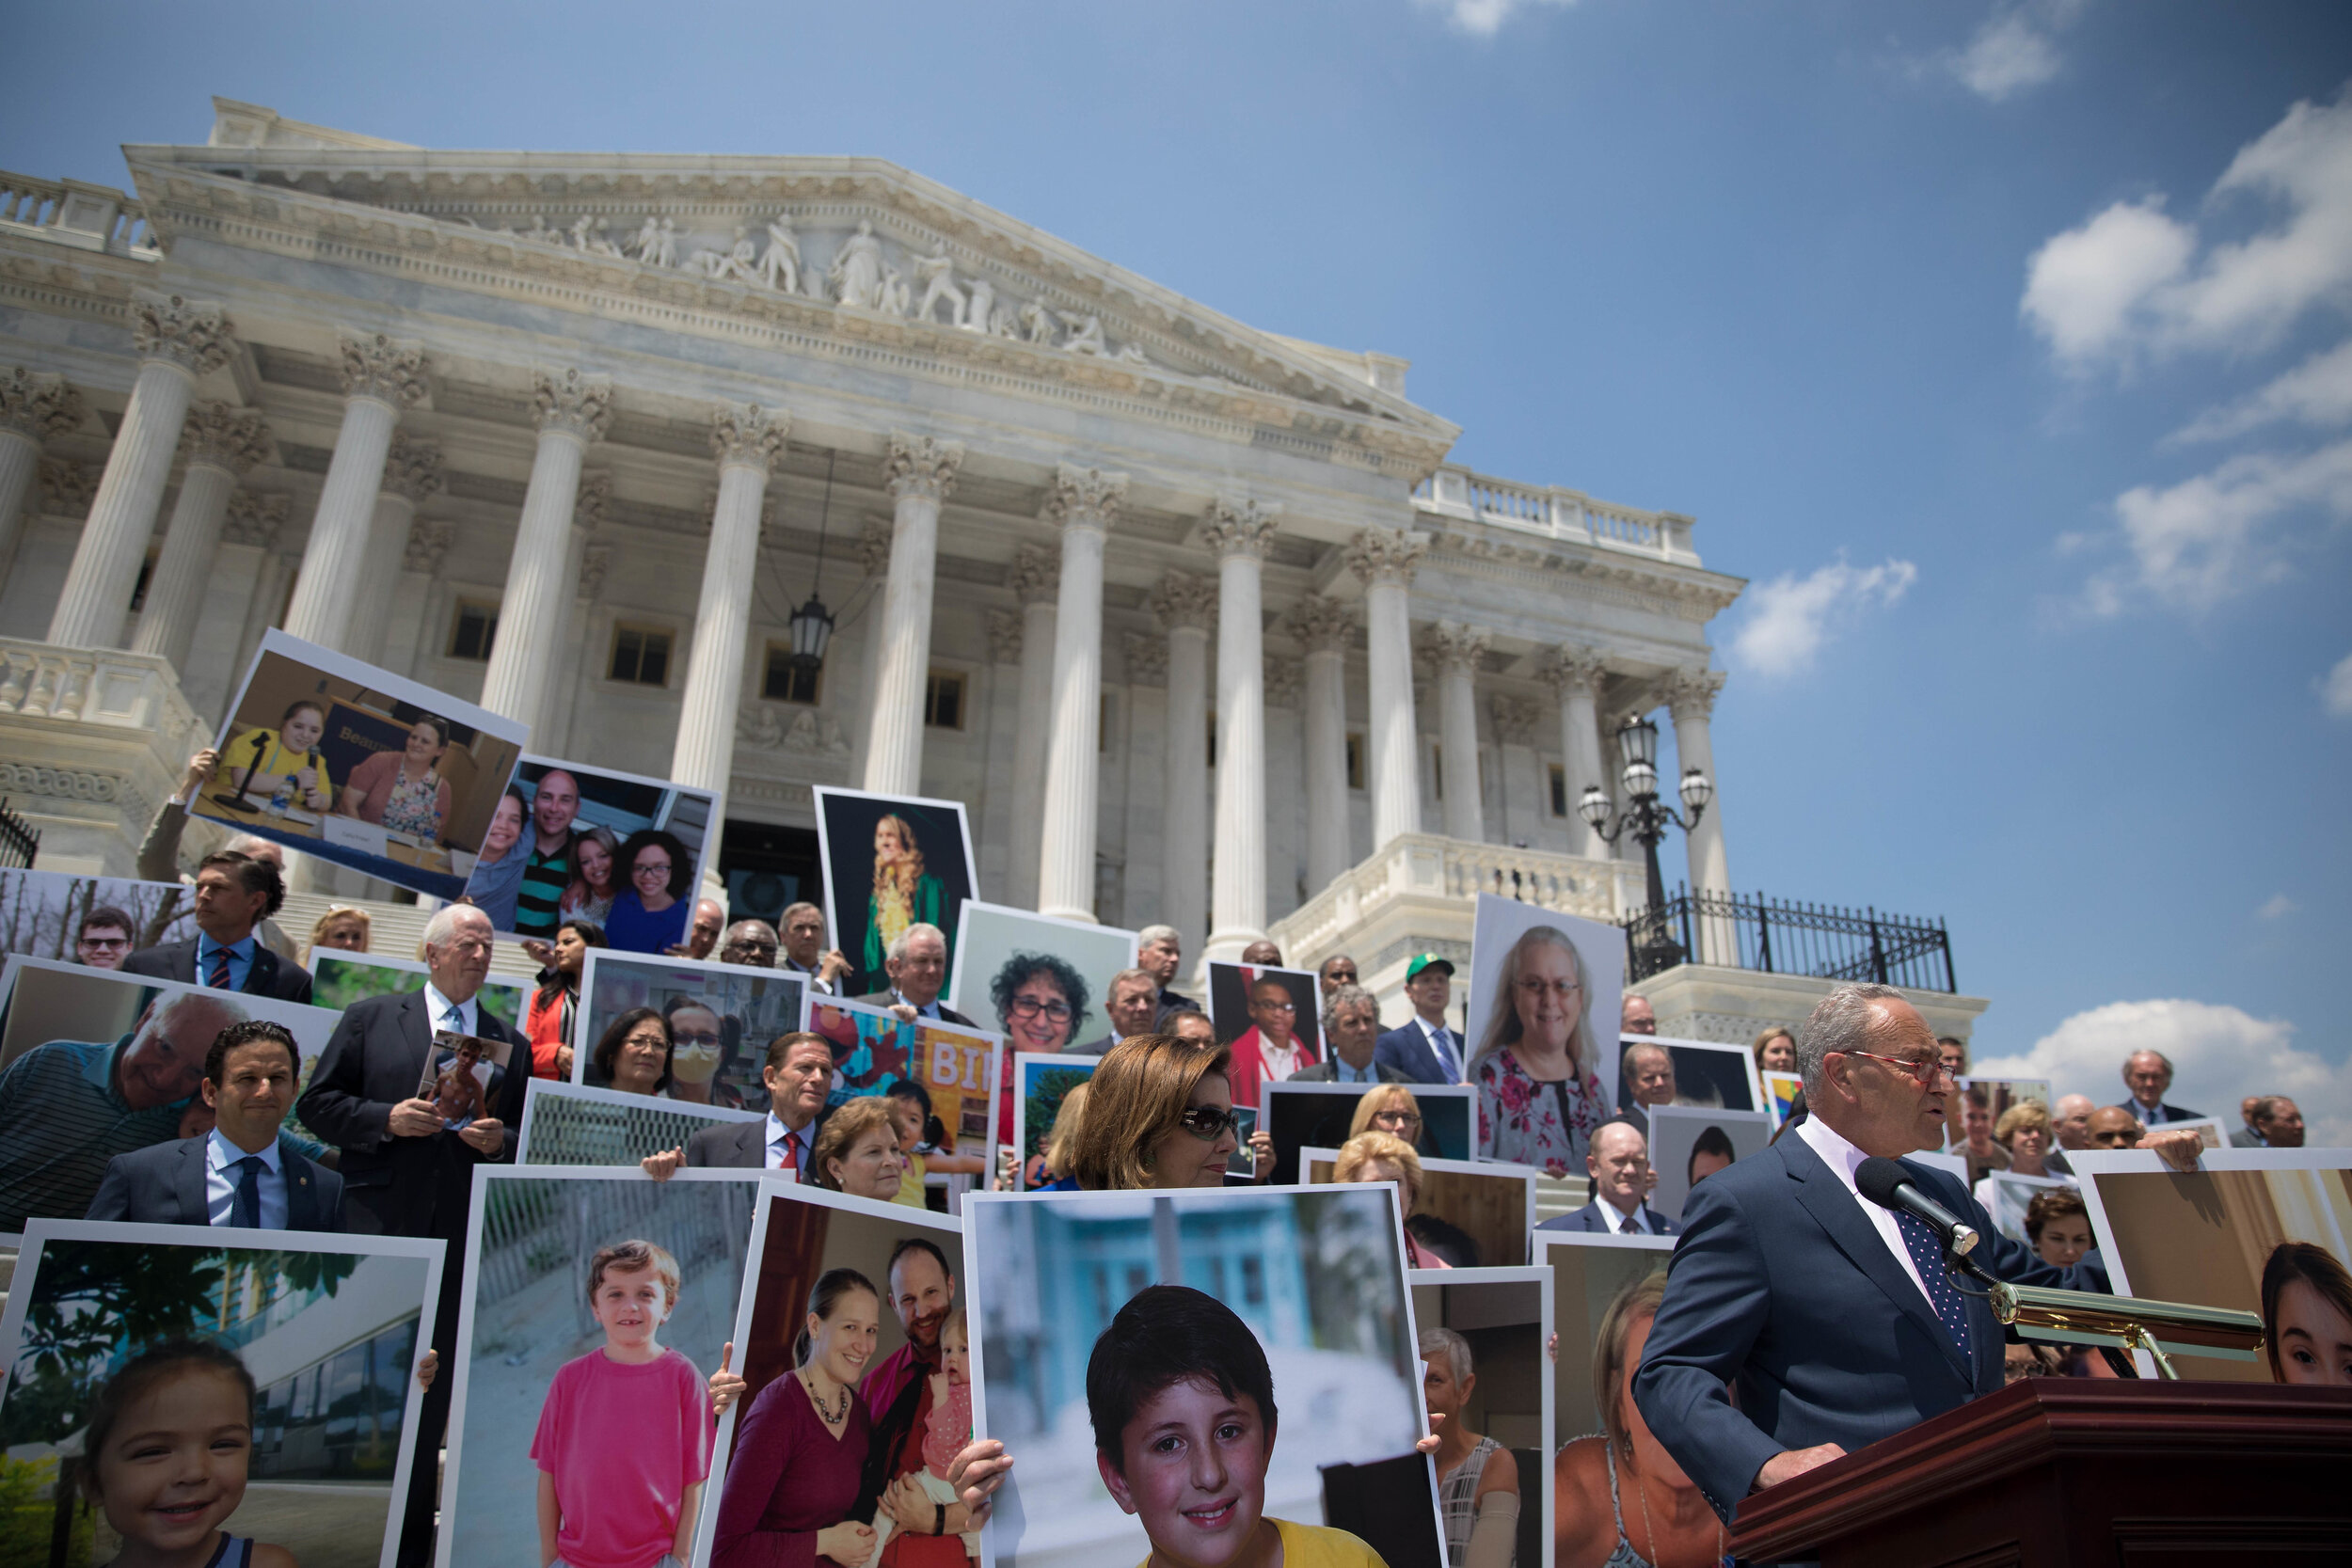 Senate Democrats stand on the Supreme Court steps, holding up photos of constituents who rely on the ACA for their pre-existing conditions.